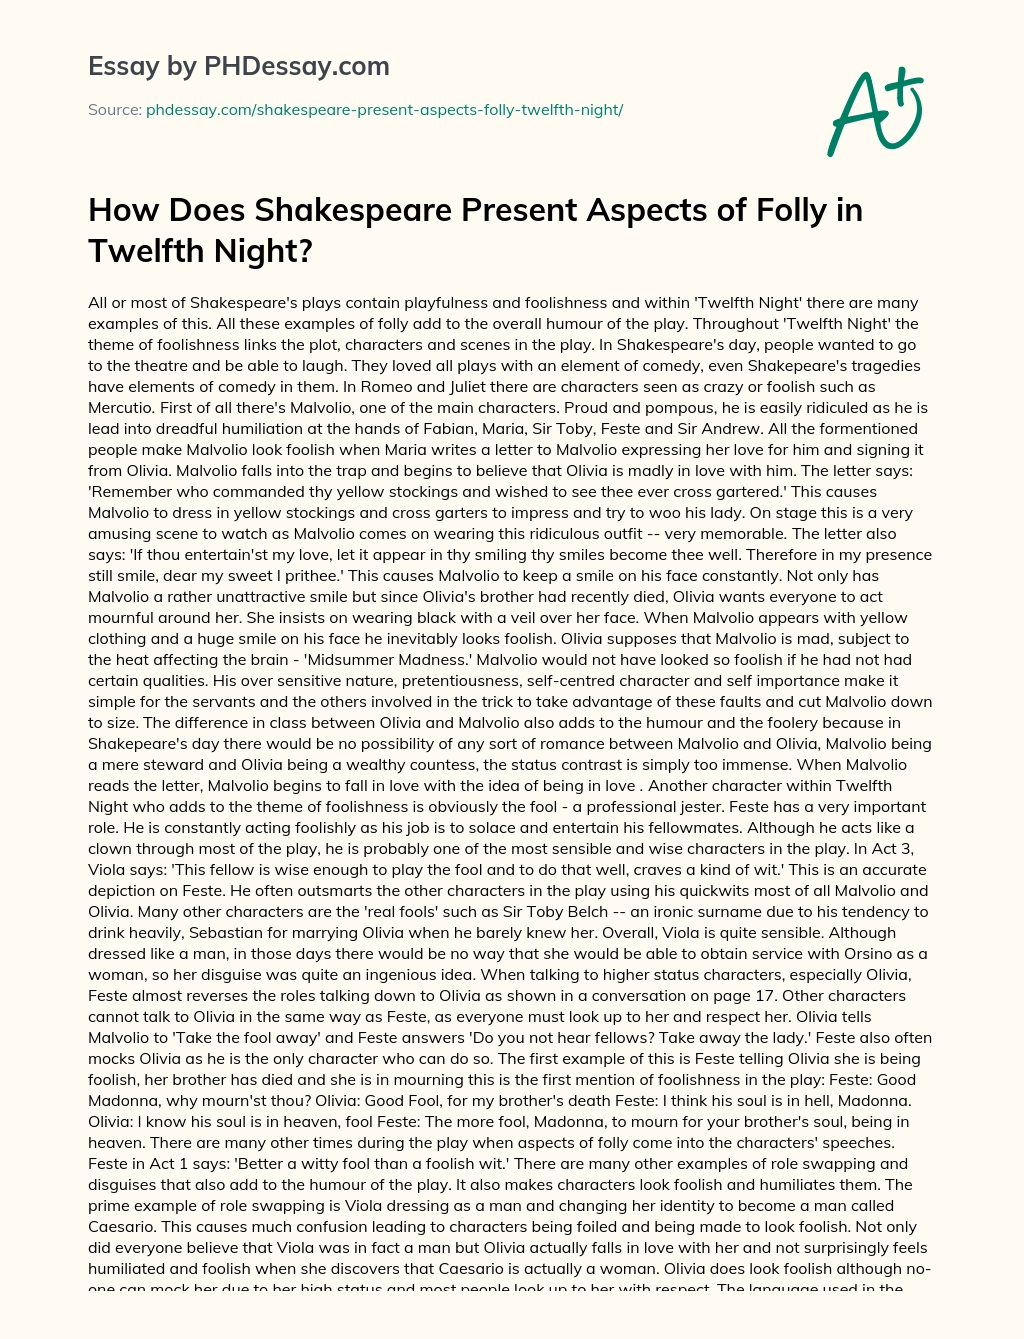 How Does Shakespeare Present Aspects of Folly in Twelfth Night? essay